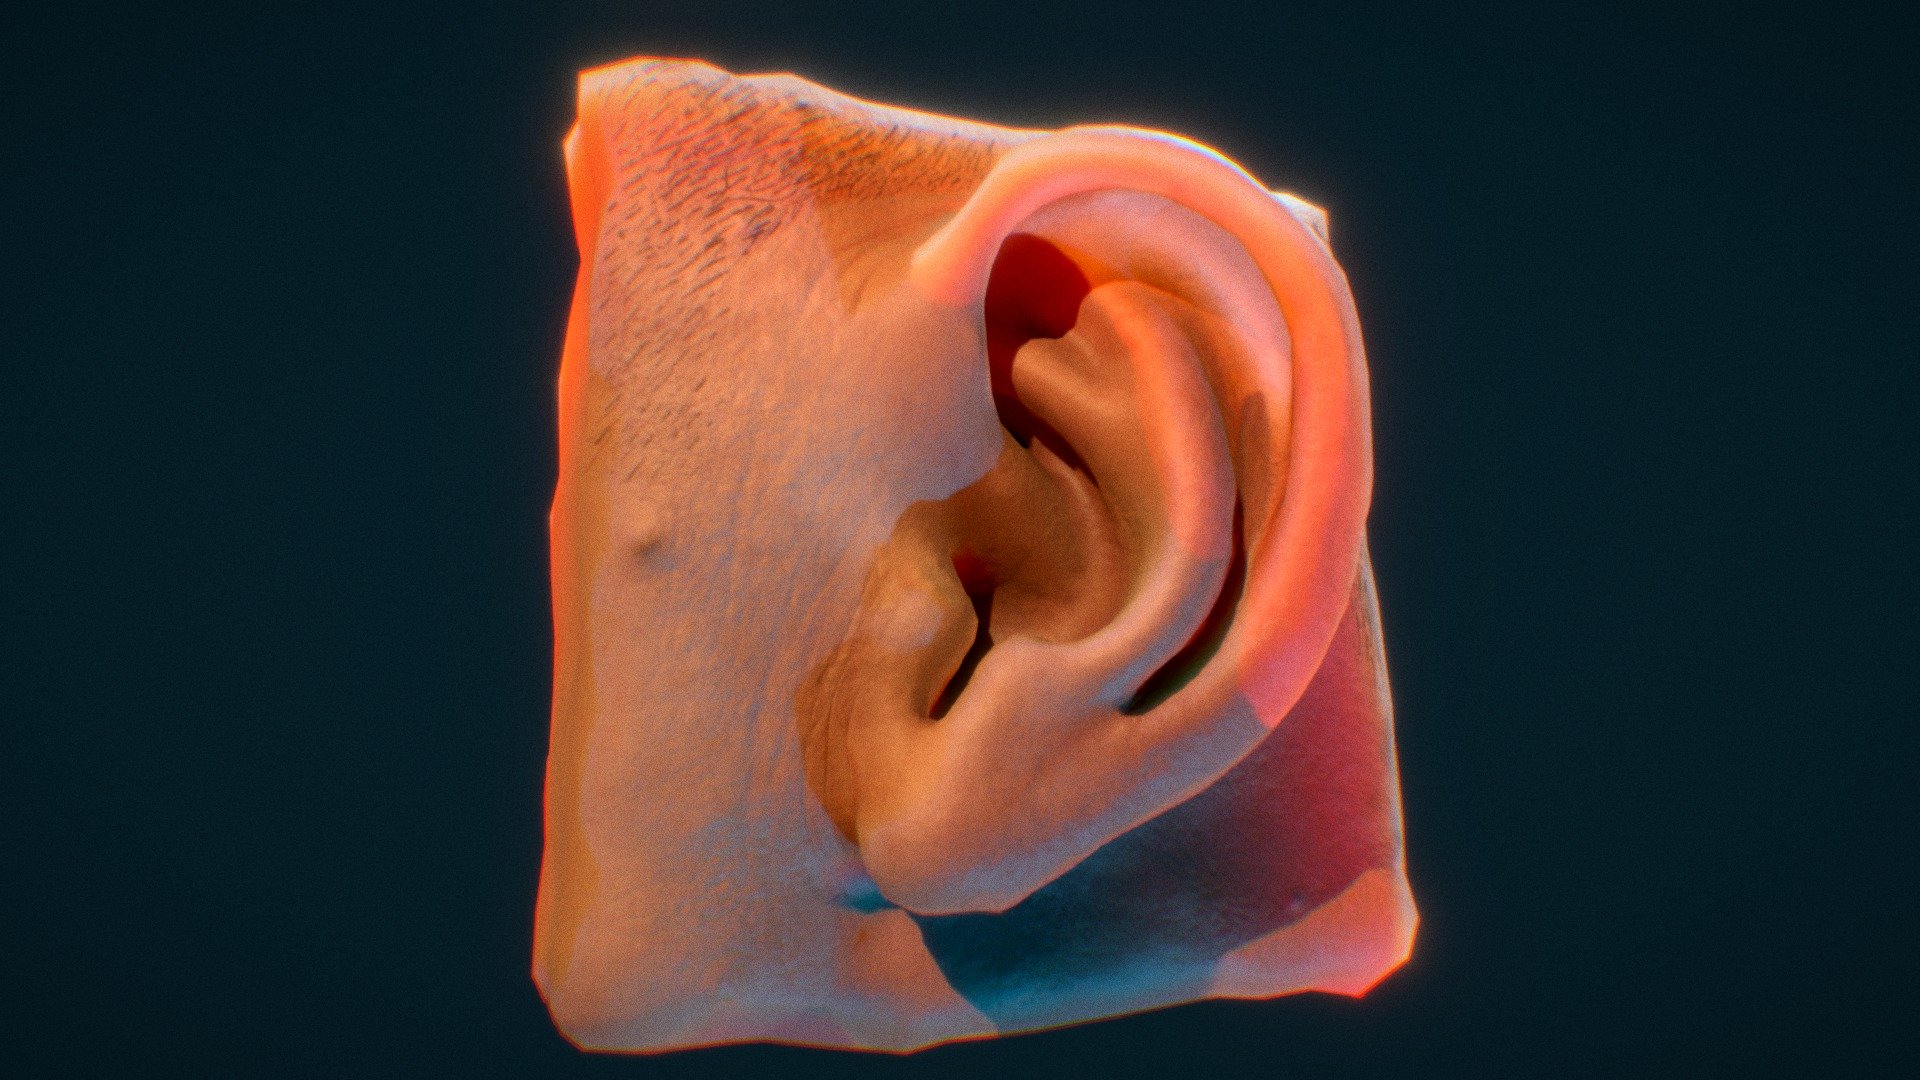 Sculpted in Sculptris

1 painted texture + 1 normal map painted with custom PS brushes

Added sketchfab's subsurface scattering

Check wireframe for an easter egg - Ear Sculpt 2-13-18 - 3D model by TShahan 3d model